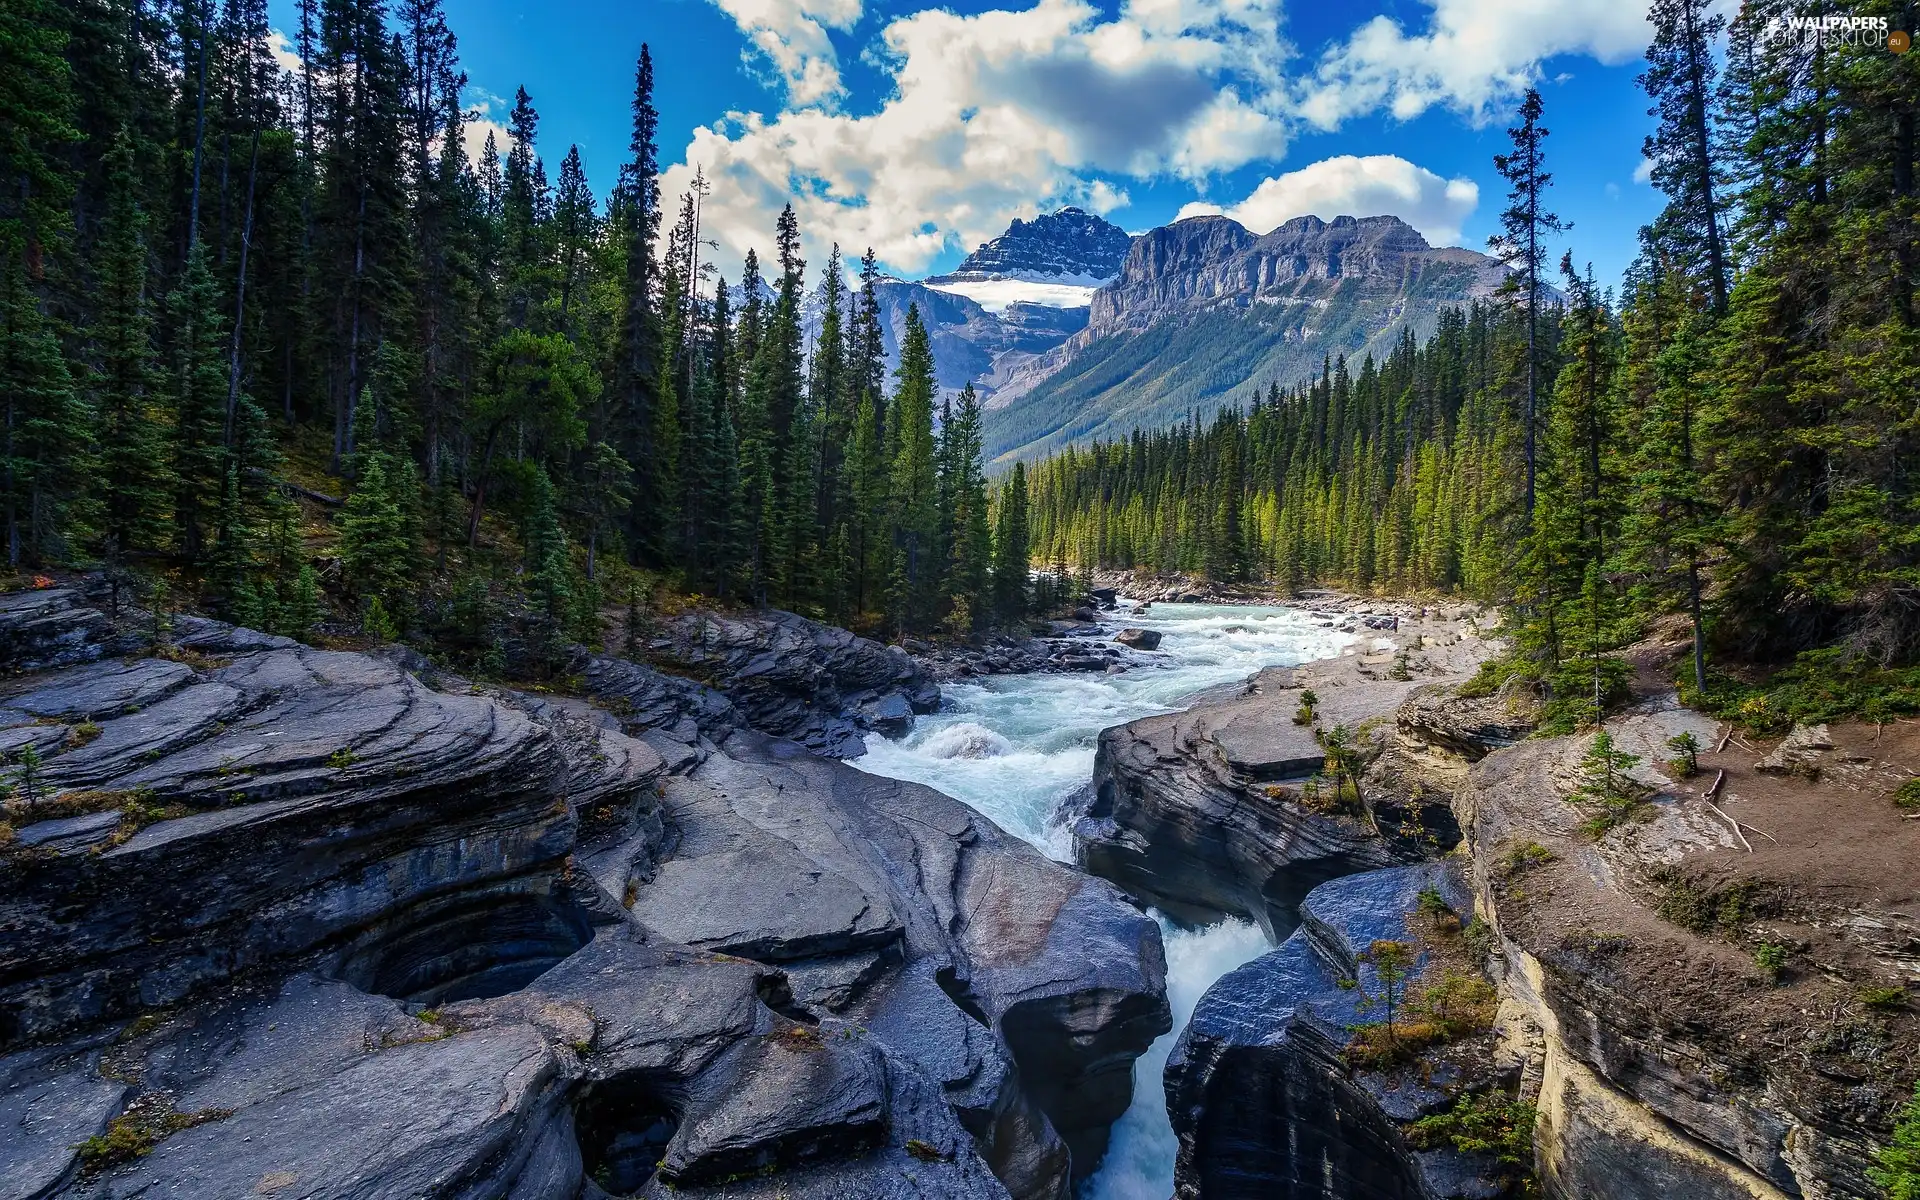 River, Mountains, viewes, Spruces, trees, rocks